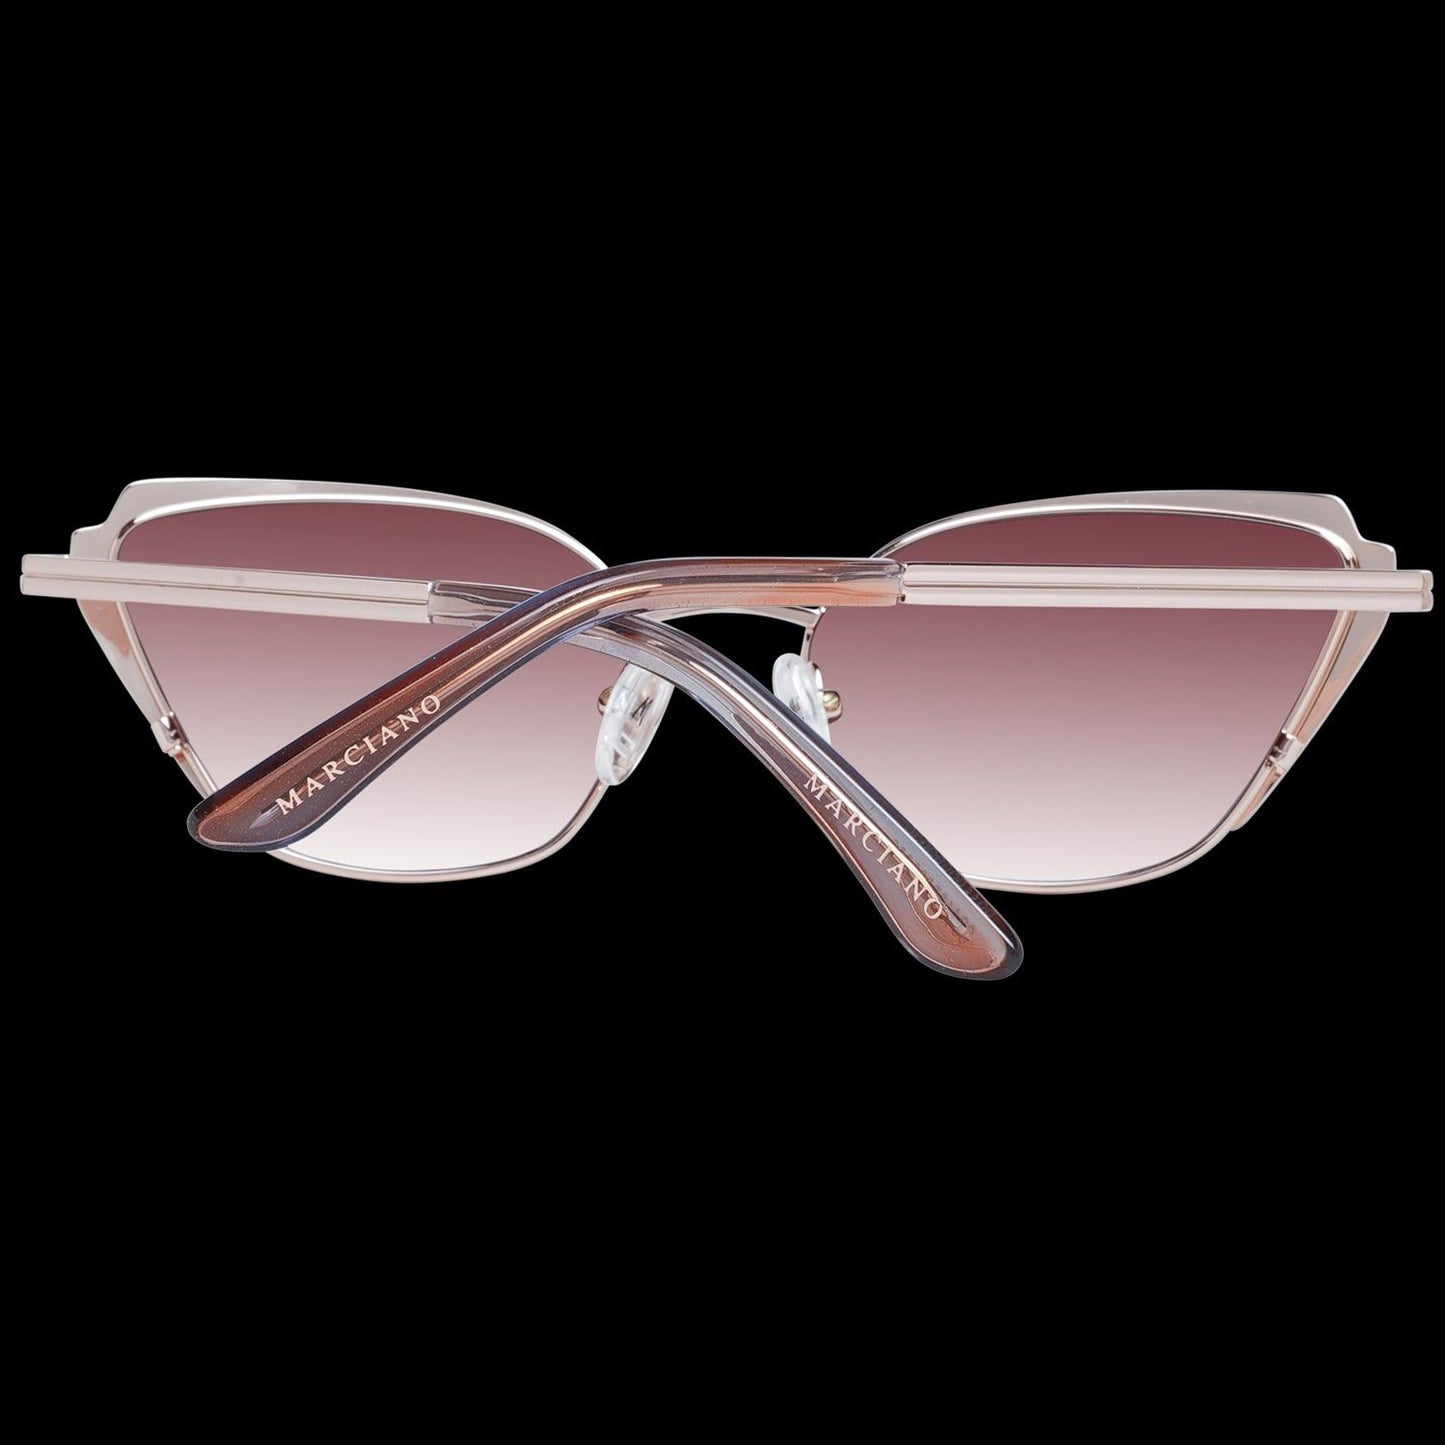 MARCIANO By GUESS SUNGLASSES MARCIANO BY GUESS MOD. GM0818 5628F SUNGLASSES & EYEWEAR marciano-by-guess-mod-gm0818-5628f